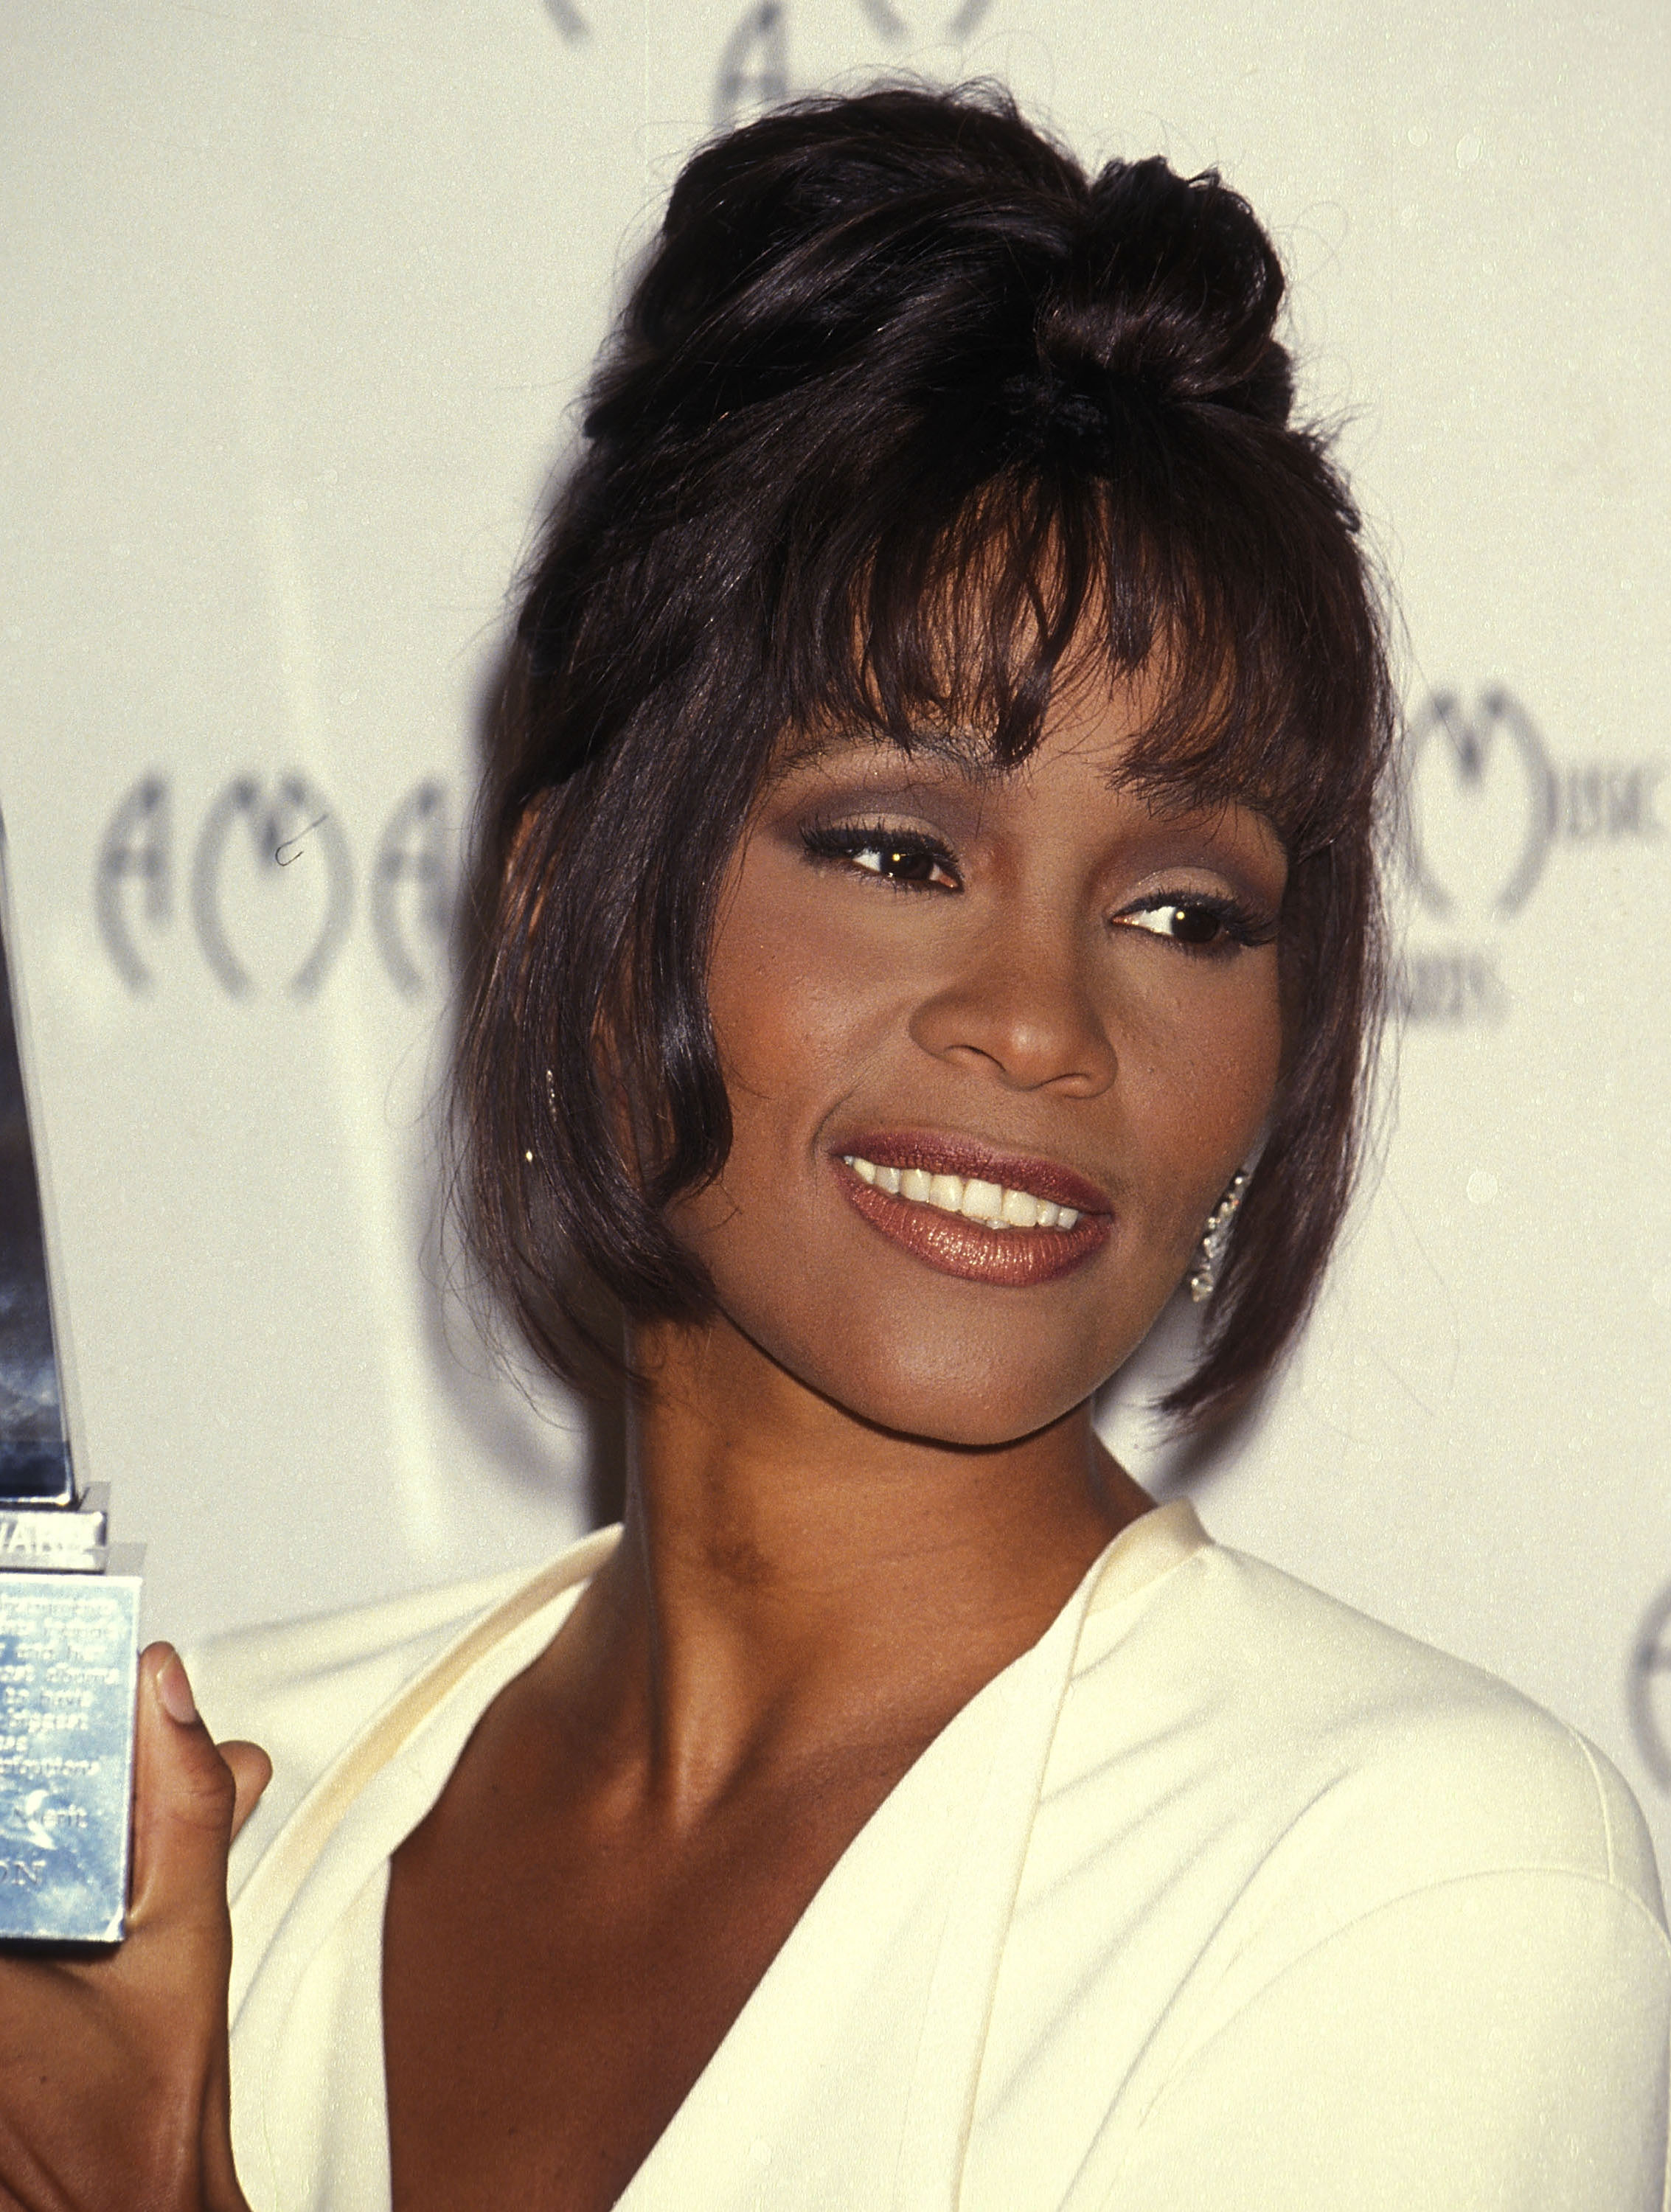 Whitney Houston attends the 21st Annual American Music Awards in Los Angeles, California, on February 7, 1994. | Source: Getty Images